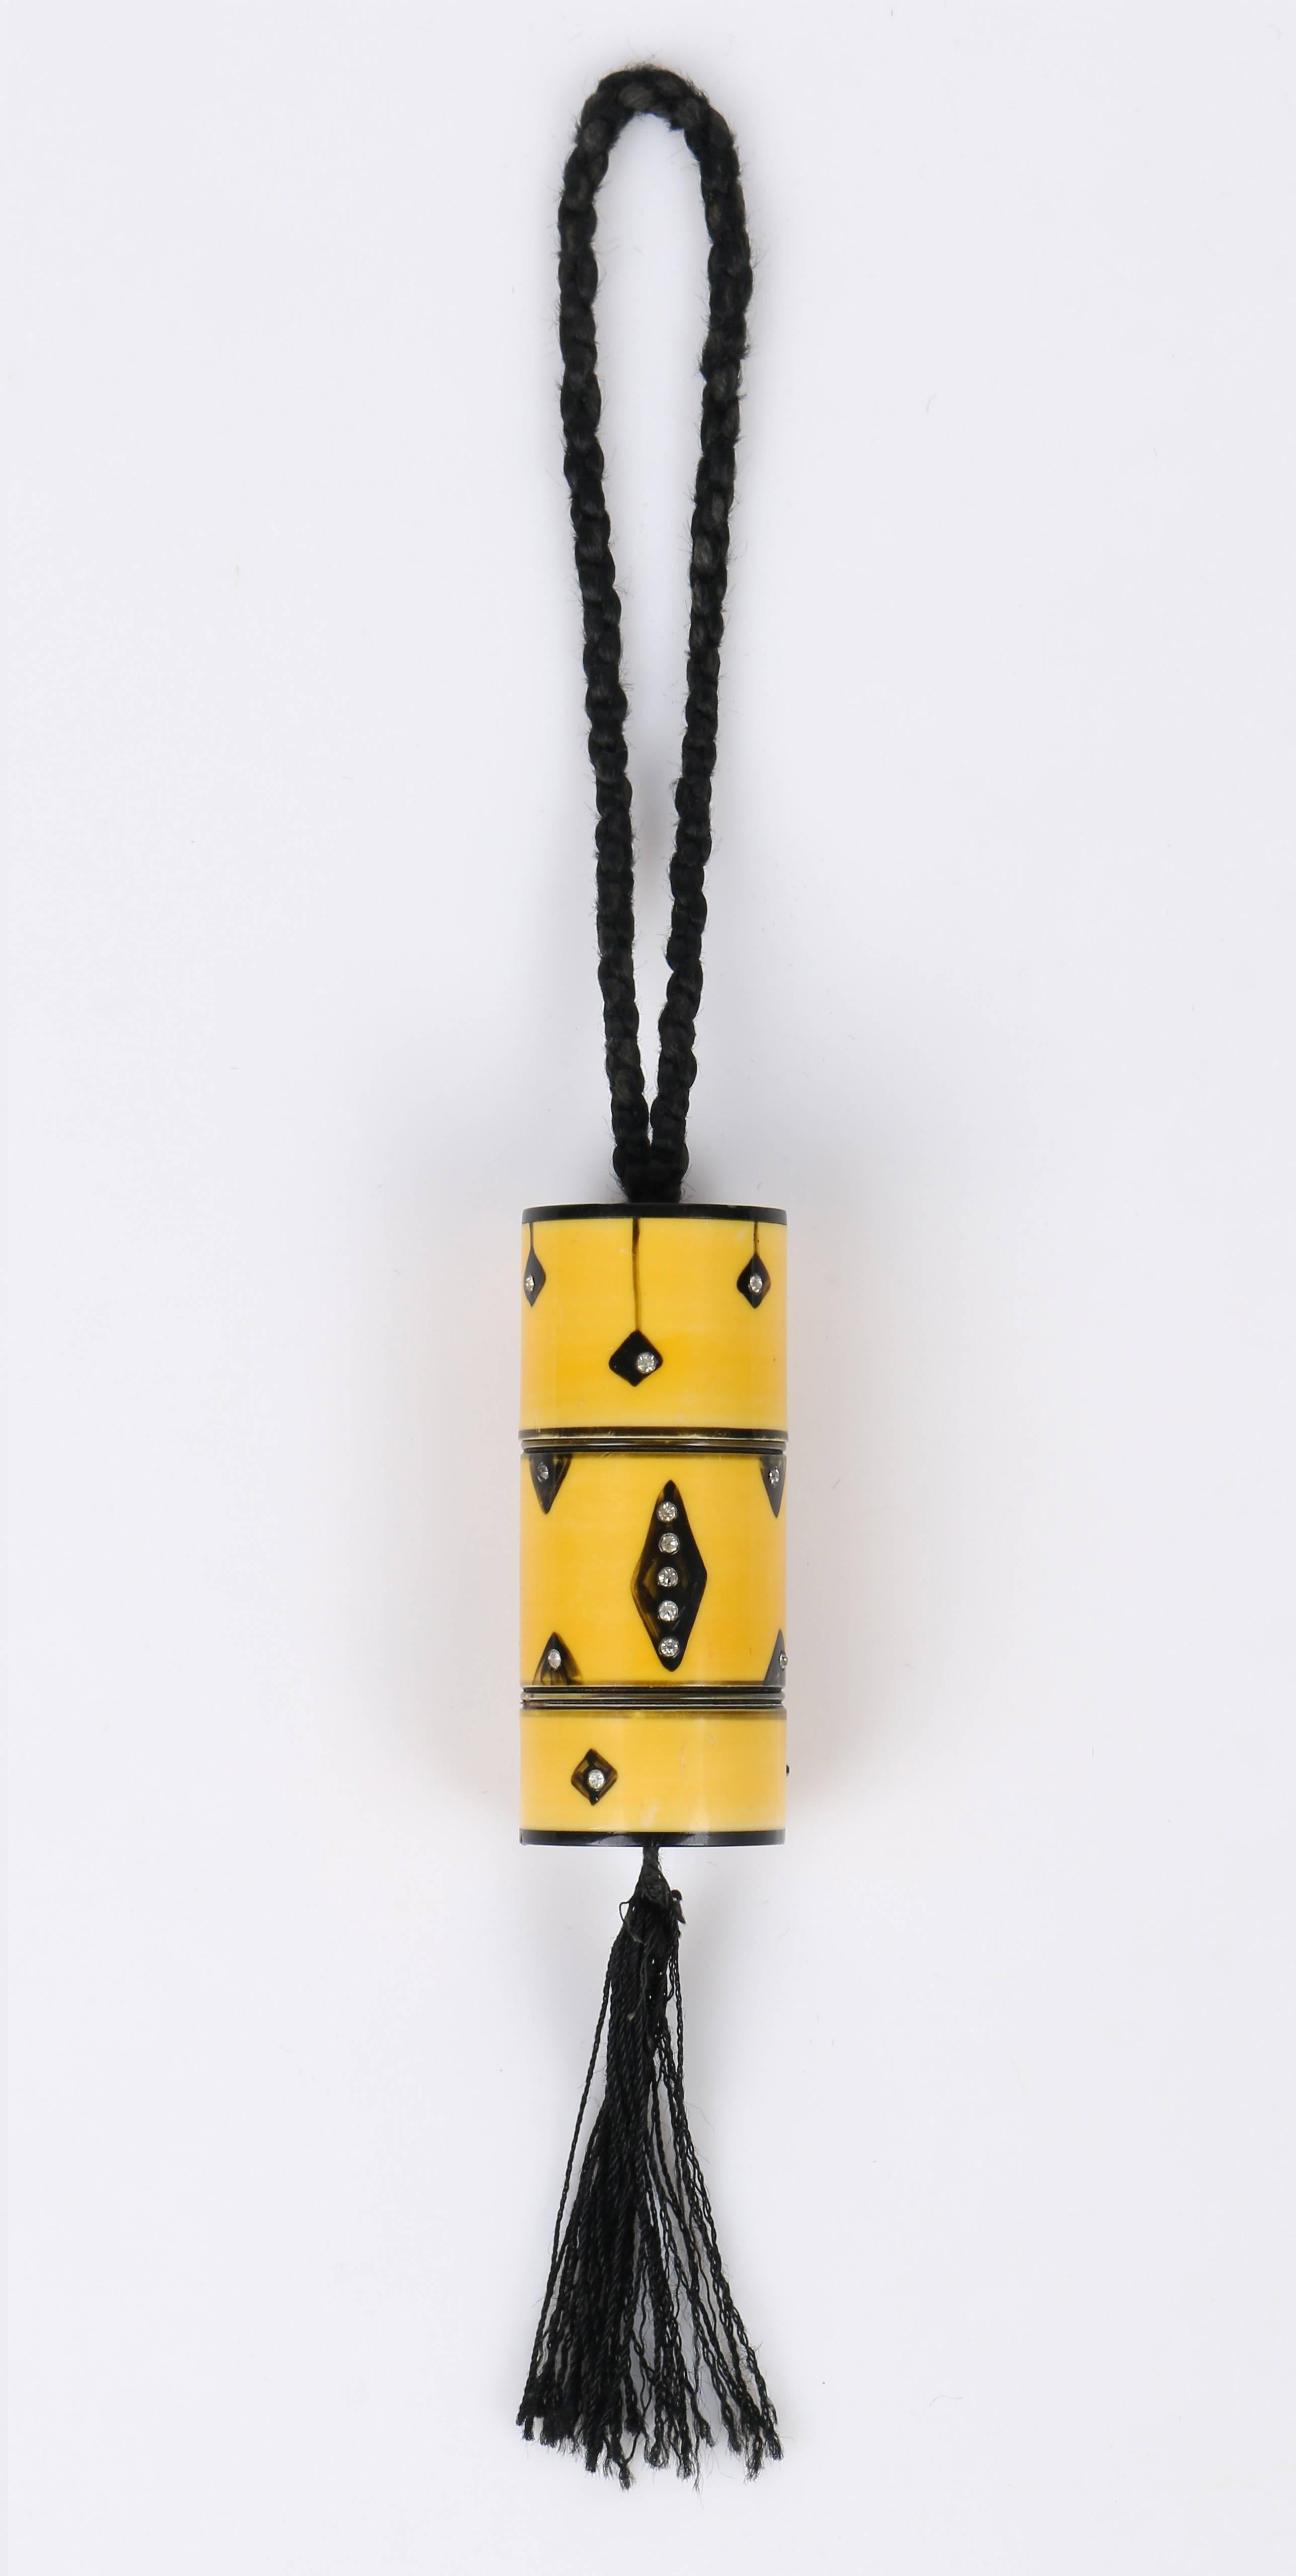 MUSEUM QUALITY: Arts & Crafts Era 1920's celluloid dance purse. Hand painted golden yellow with black geometric detail; silver rhinestone embellishment. Cylindrical shape. Black braided cord hand strap. Tassel detail at bottom. Bag unscrews into